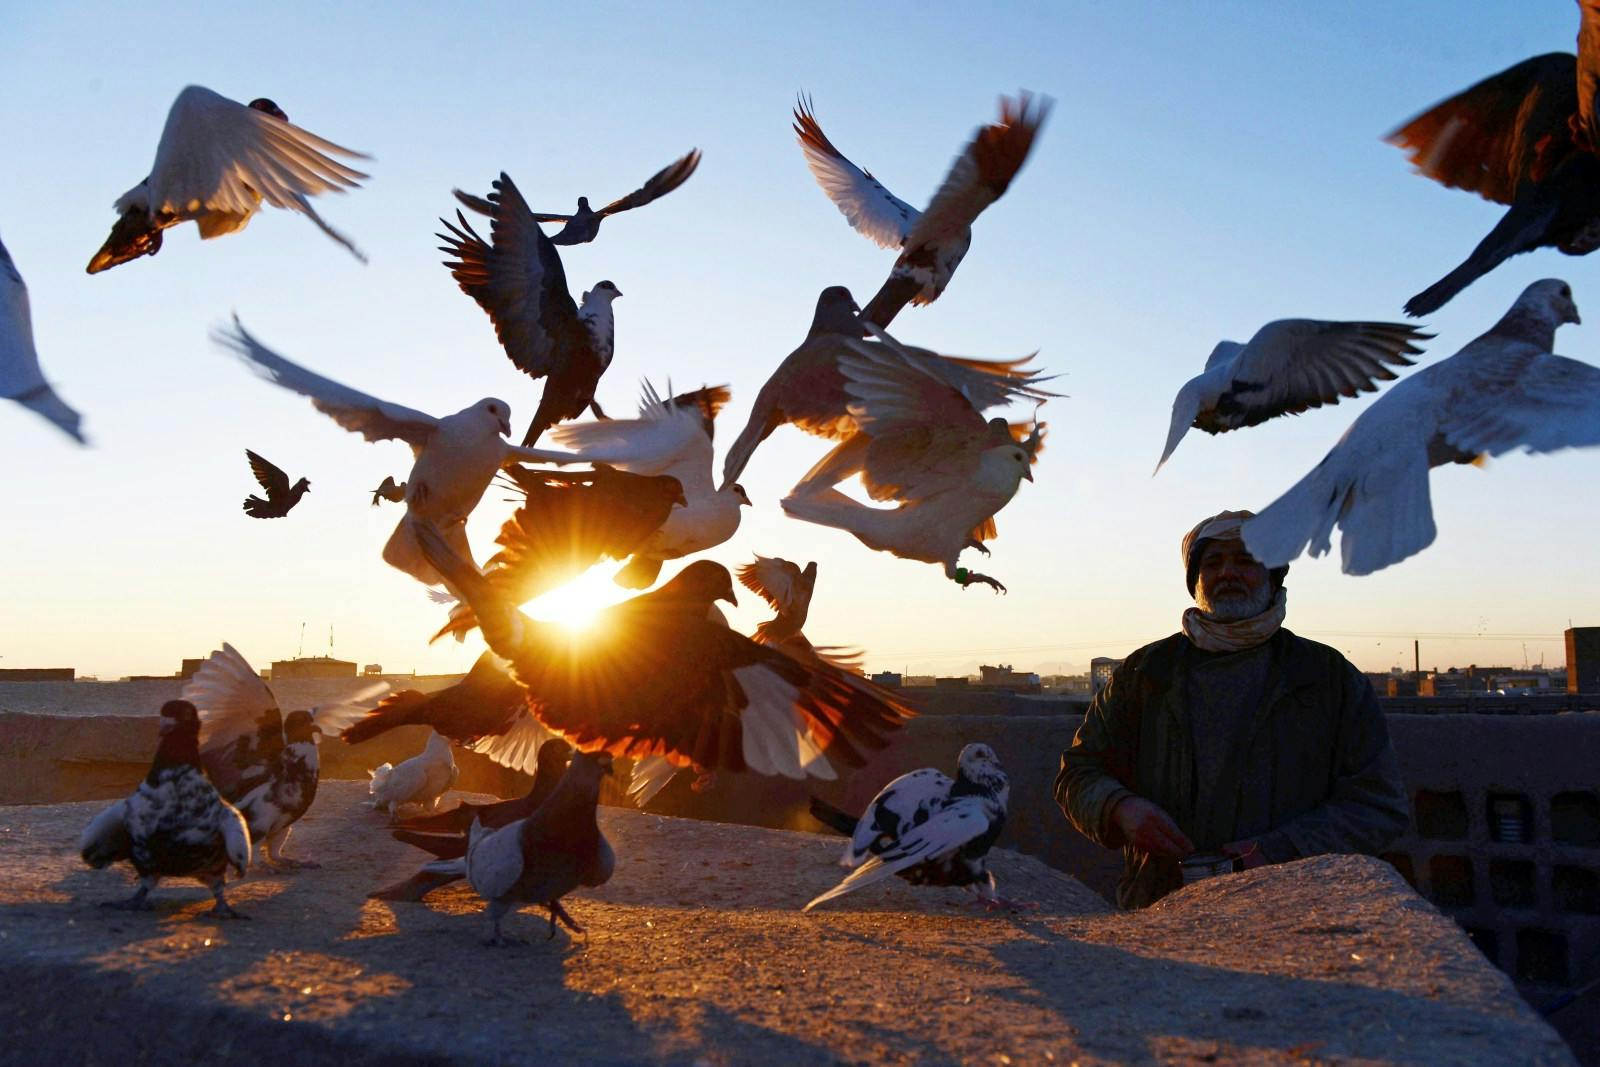 Afghan pigeon fancier Abas Aqa feeds his birds as some take flight on the rooftop of his residence(Aref Karimi/AFP via Getty Images)